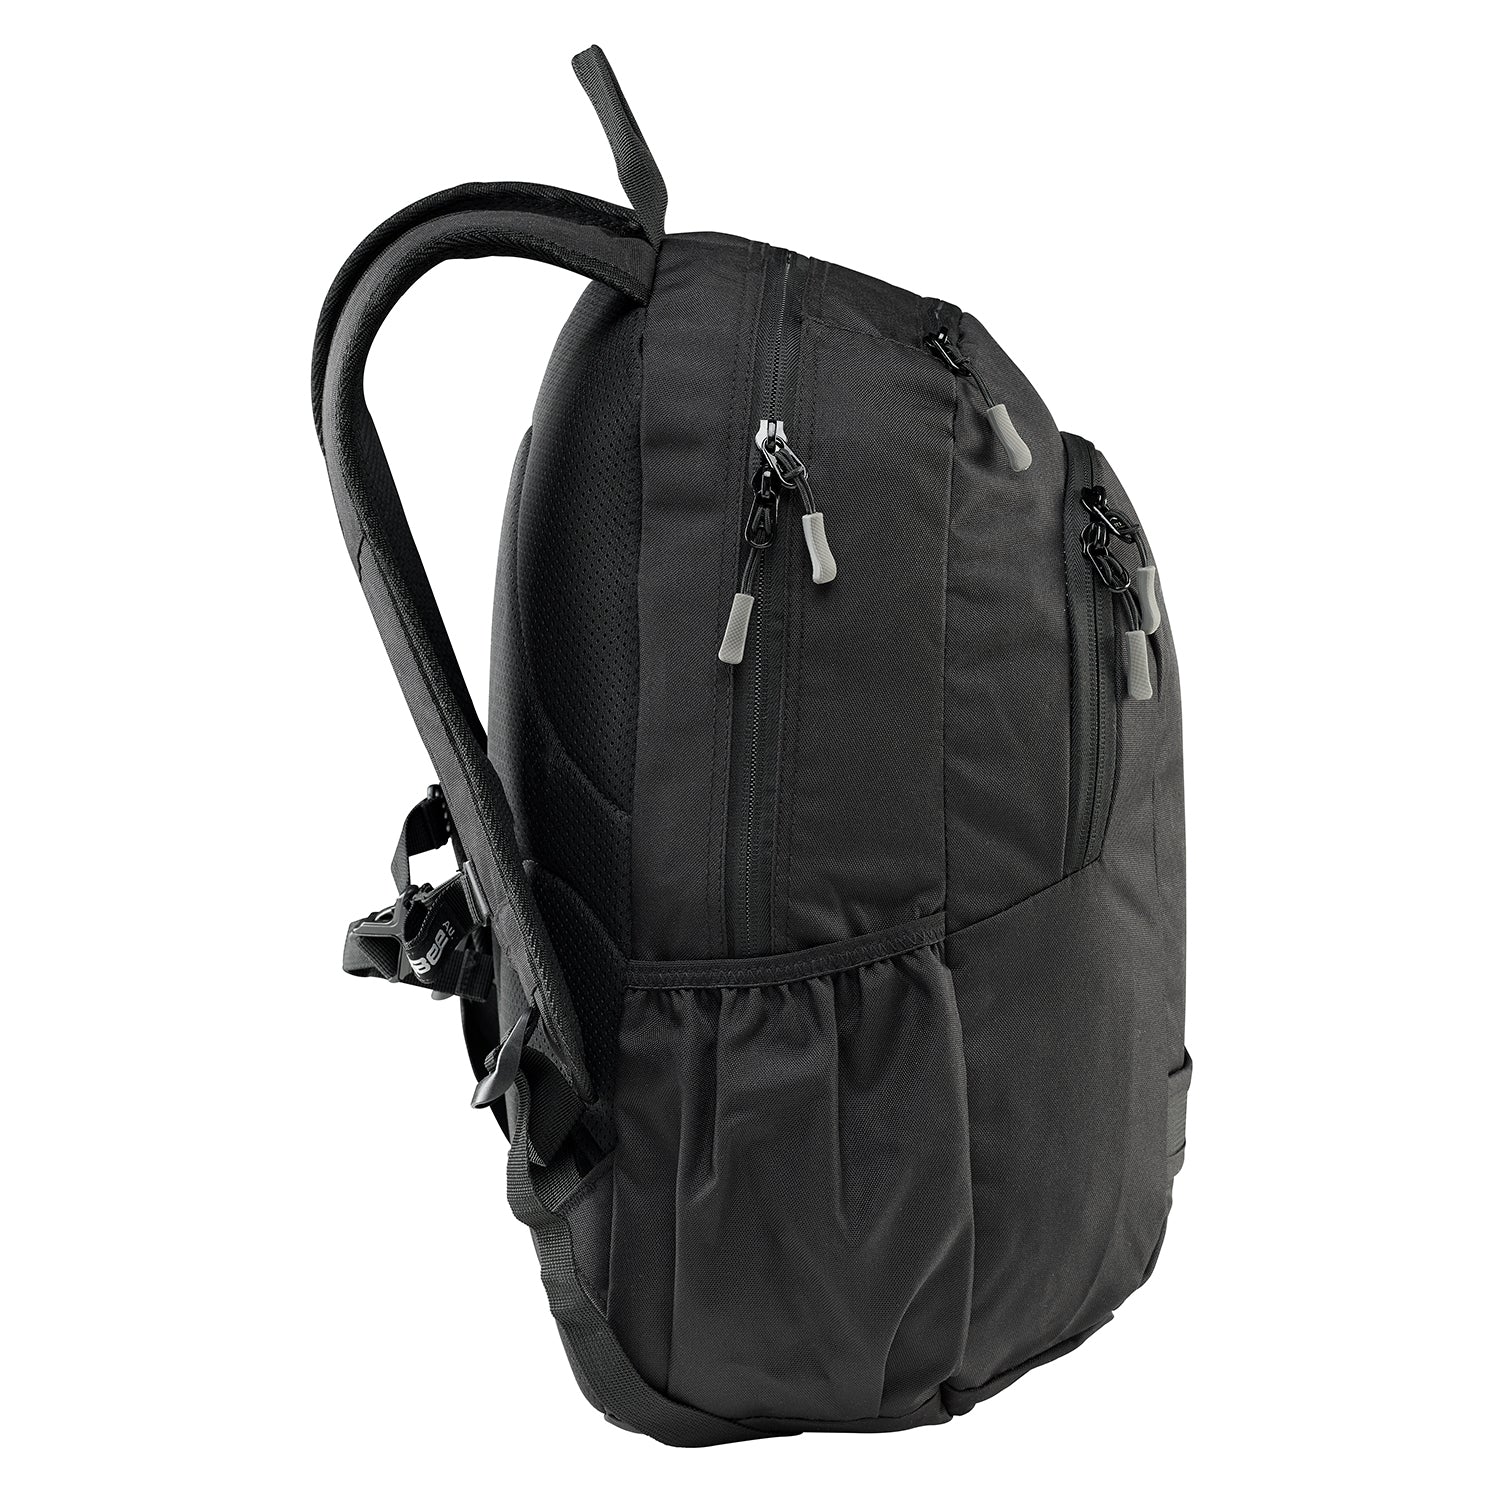 Caribee Nile 30L backpack - laptop and tablet ready